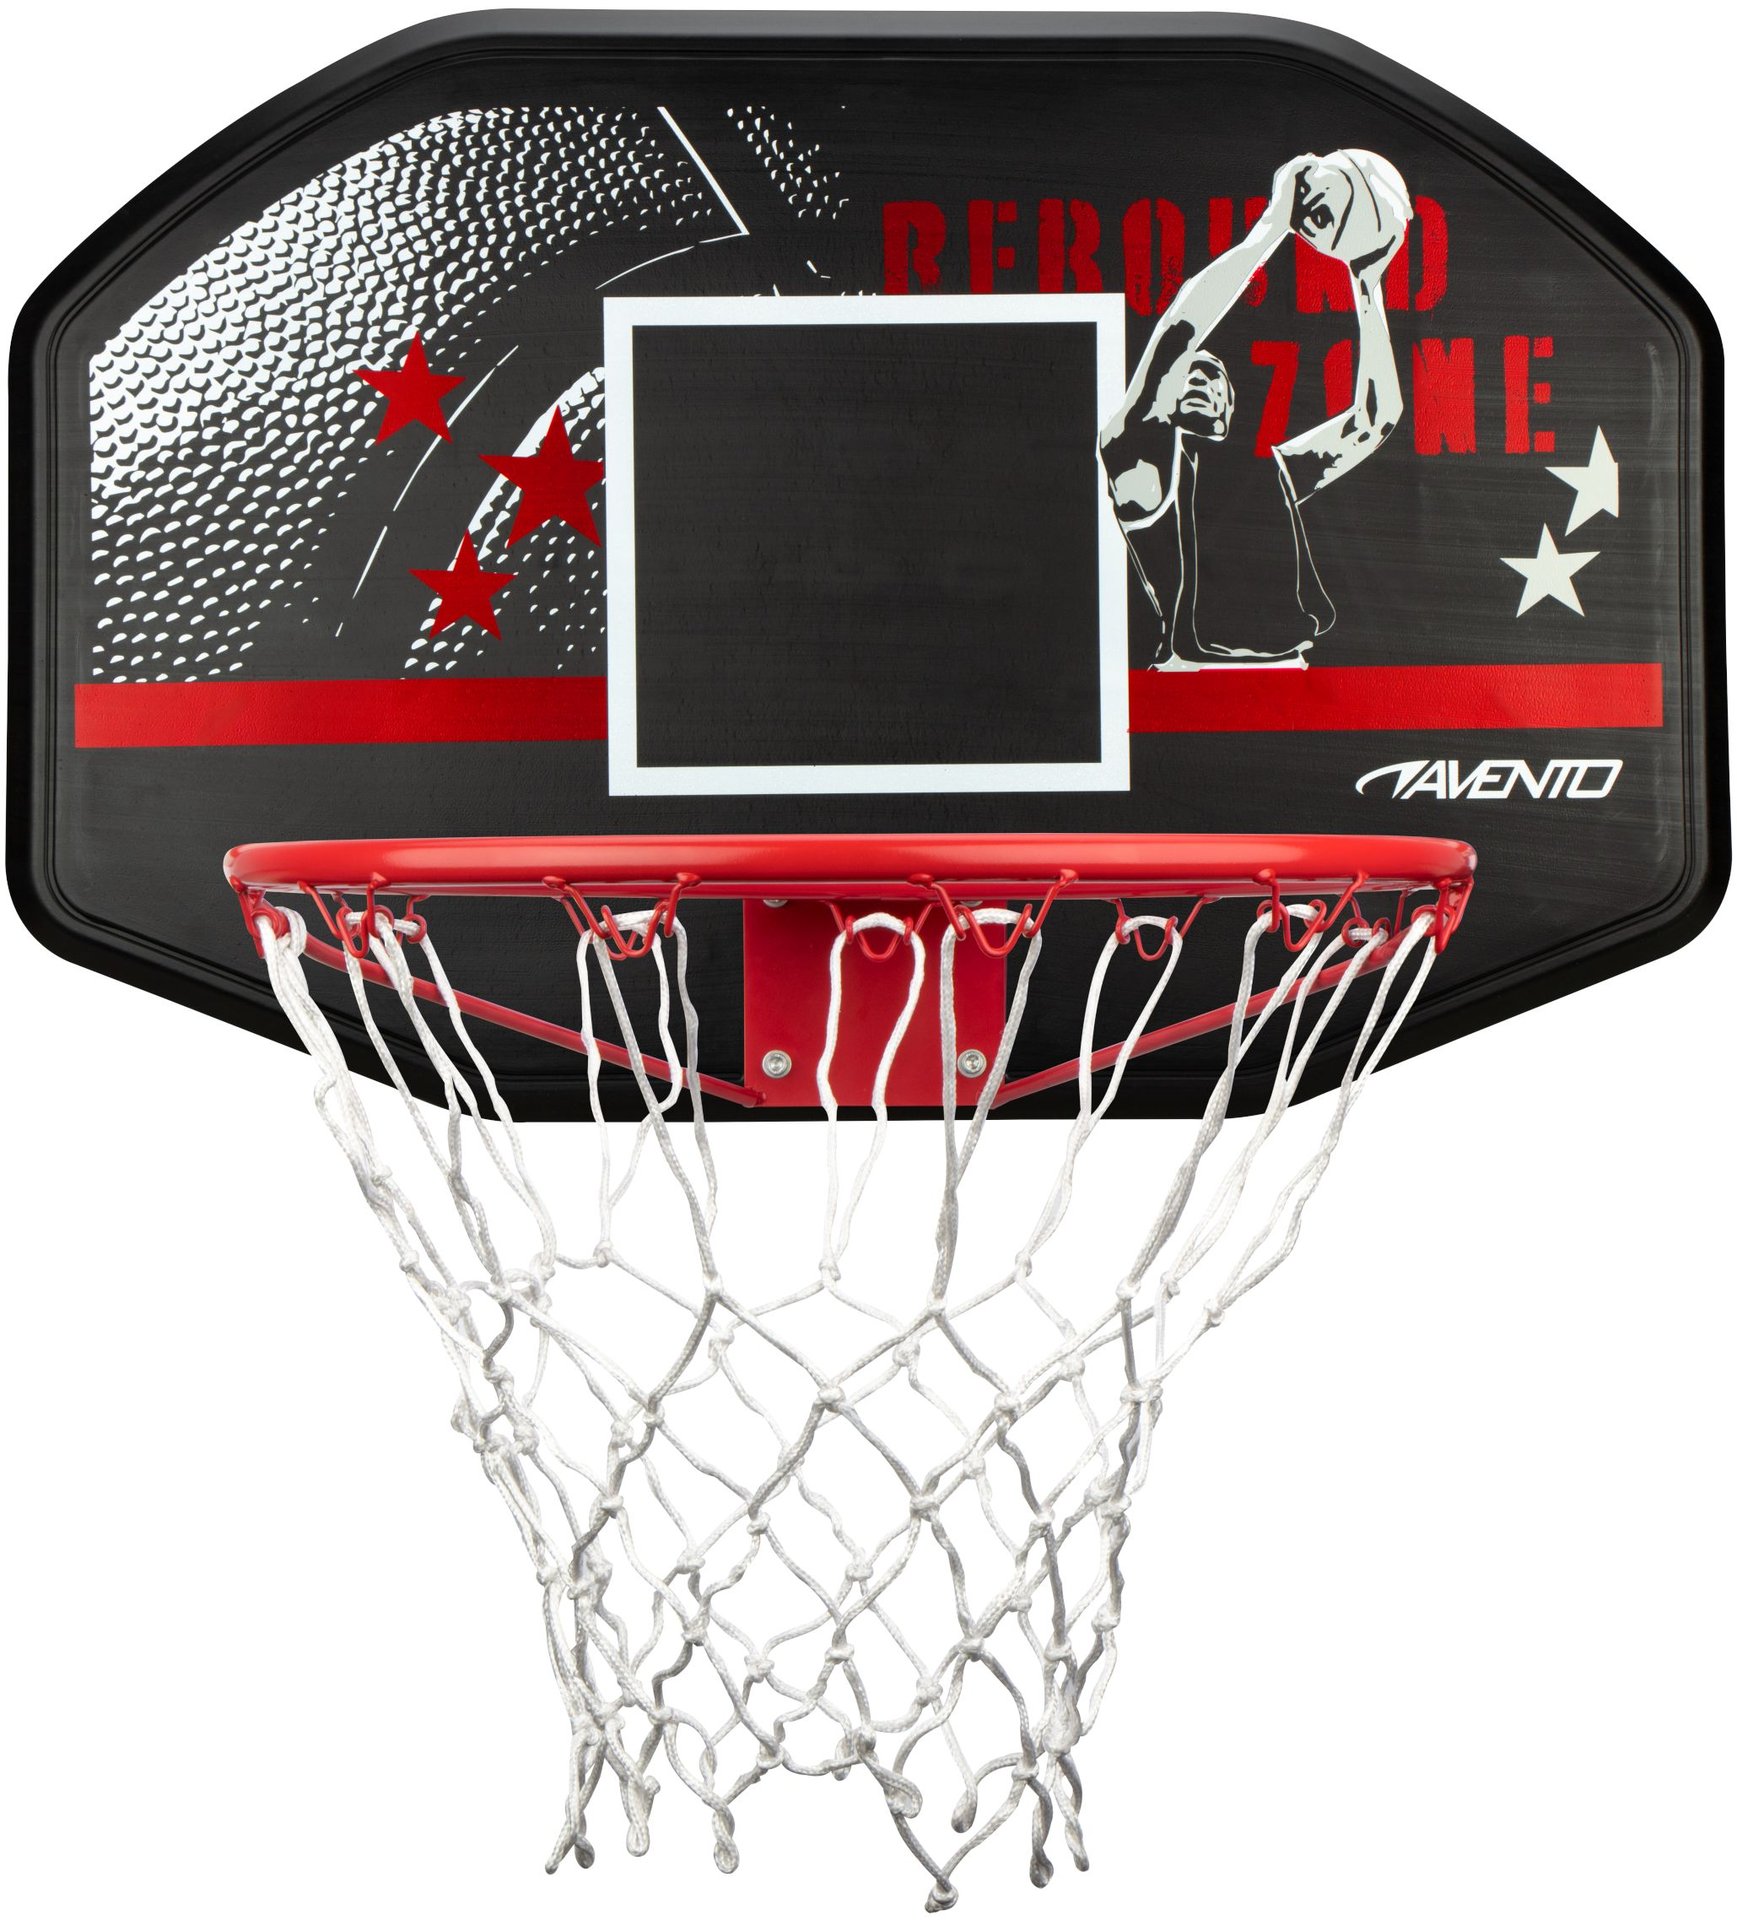 47RC - Basketball board + Hoop + Net • Rebound Zone • - Design, development  and trade of winning sports, outdoor and leisure goods